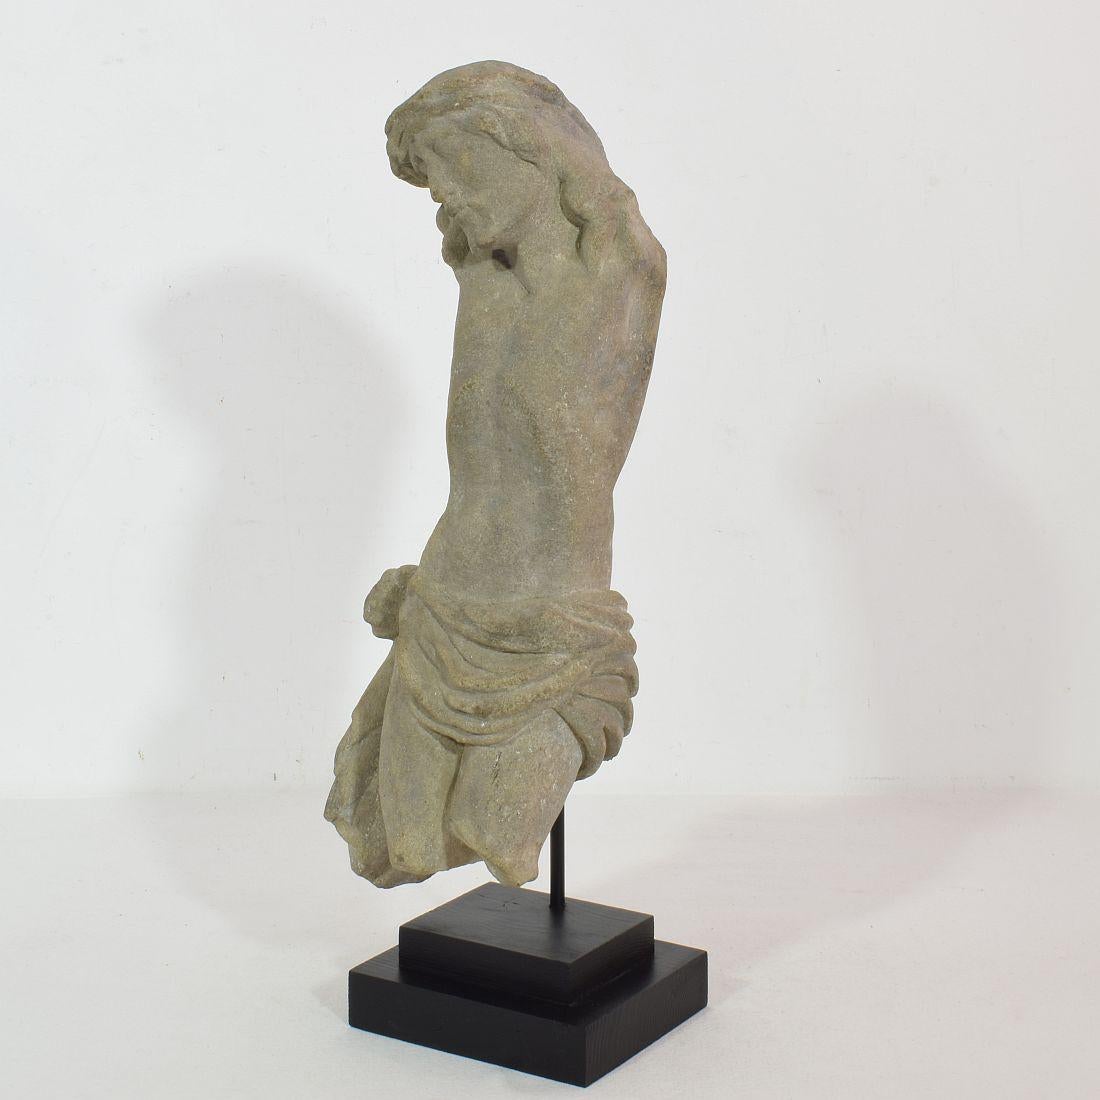 Unique carved sandstone Christ figure fragment with a strong expression. Beautiful weathered , France circa 1600-1700. Weathered, and losses. Measurement with the base.